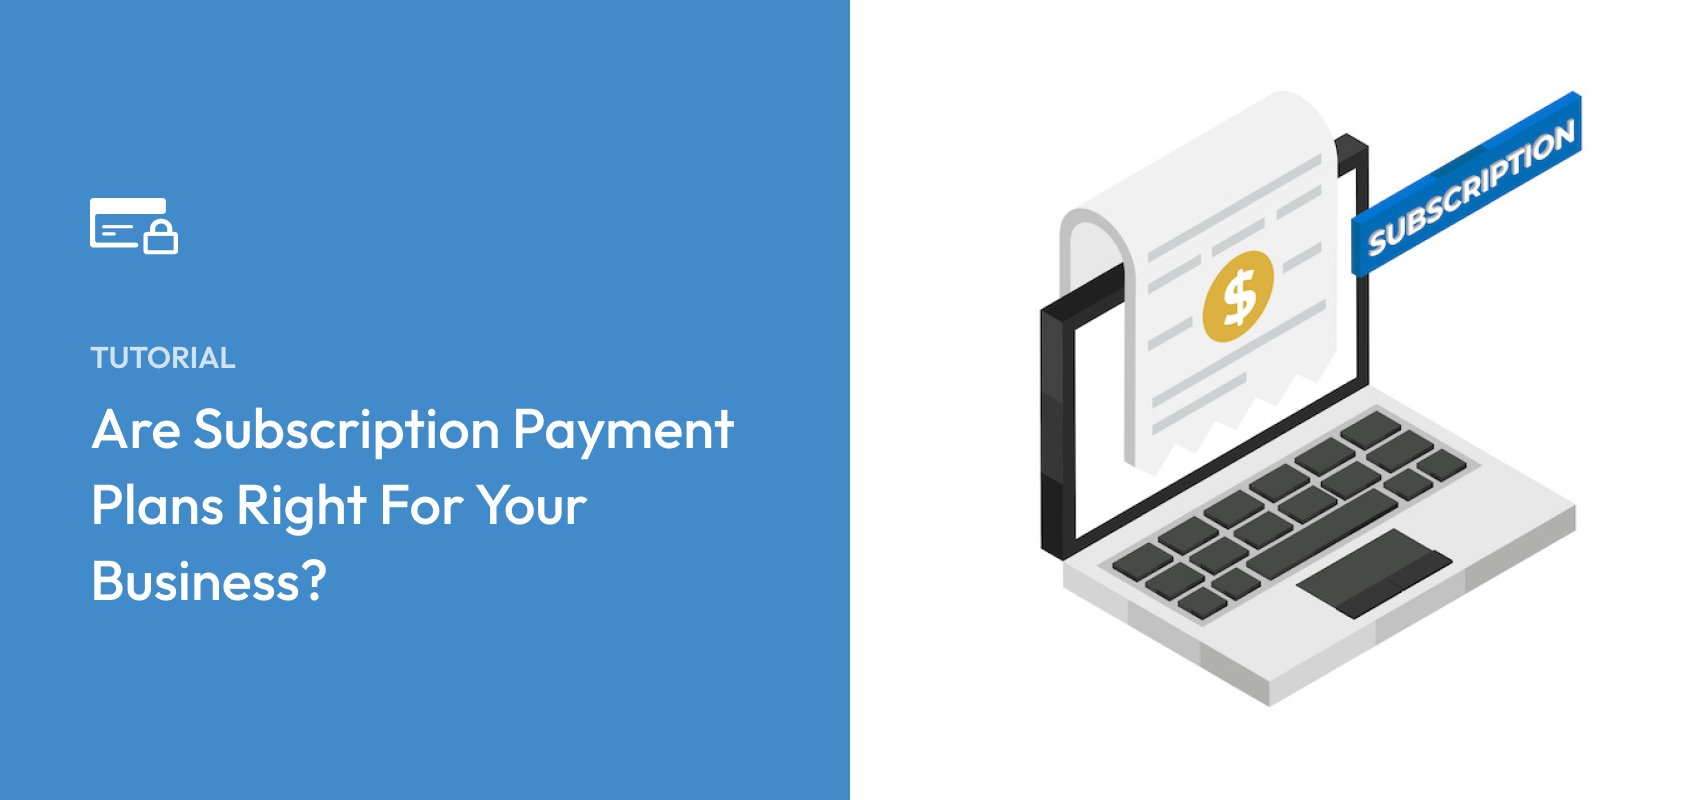 Are Subscription Payment Plans Right For Your Business?